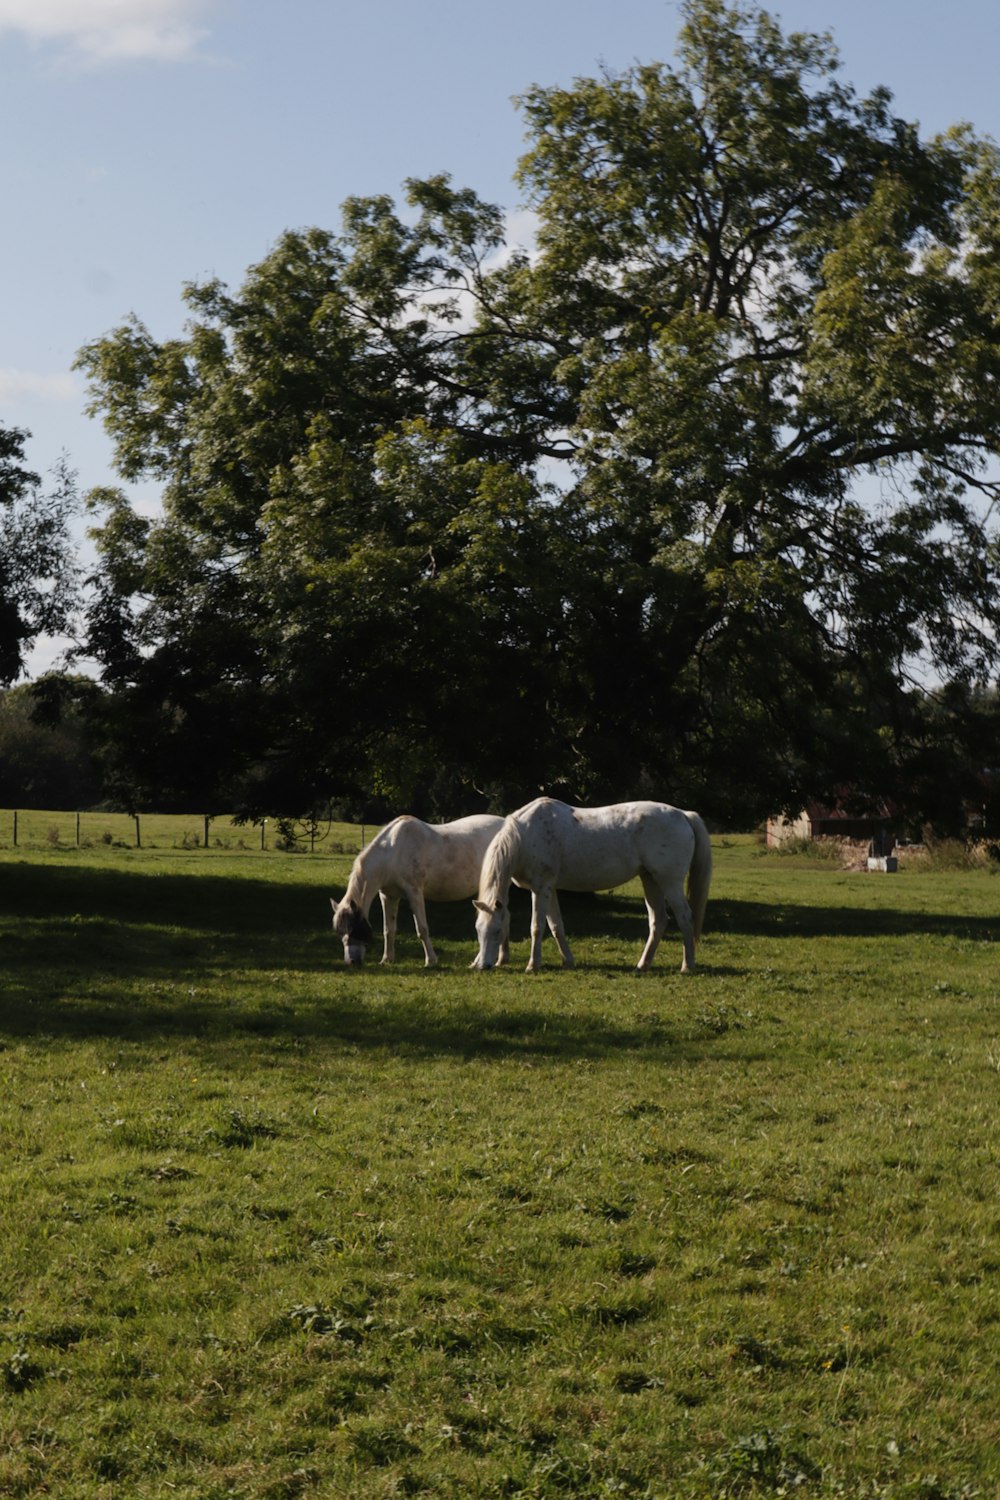 two white horses grazing in a grassy field